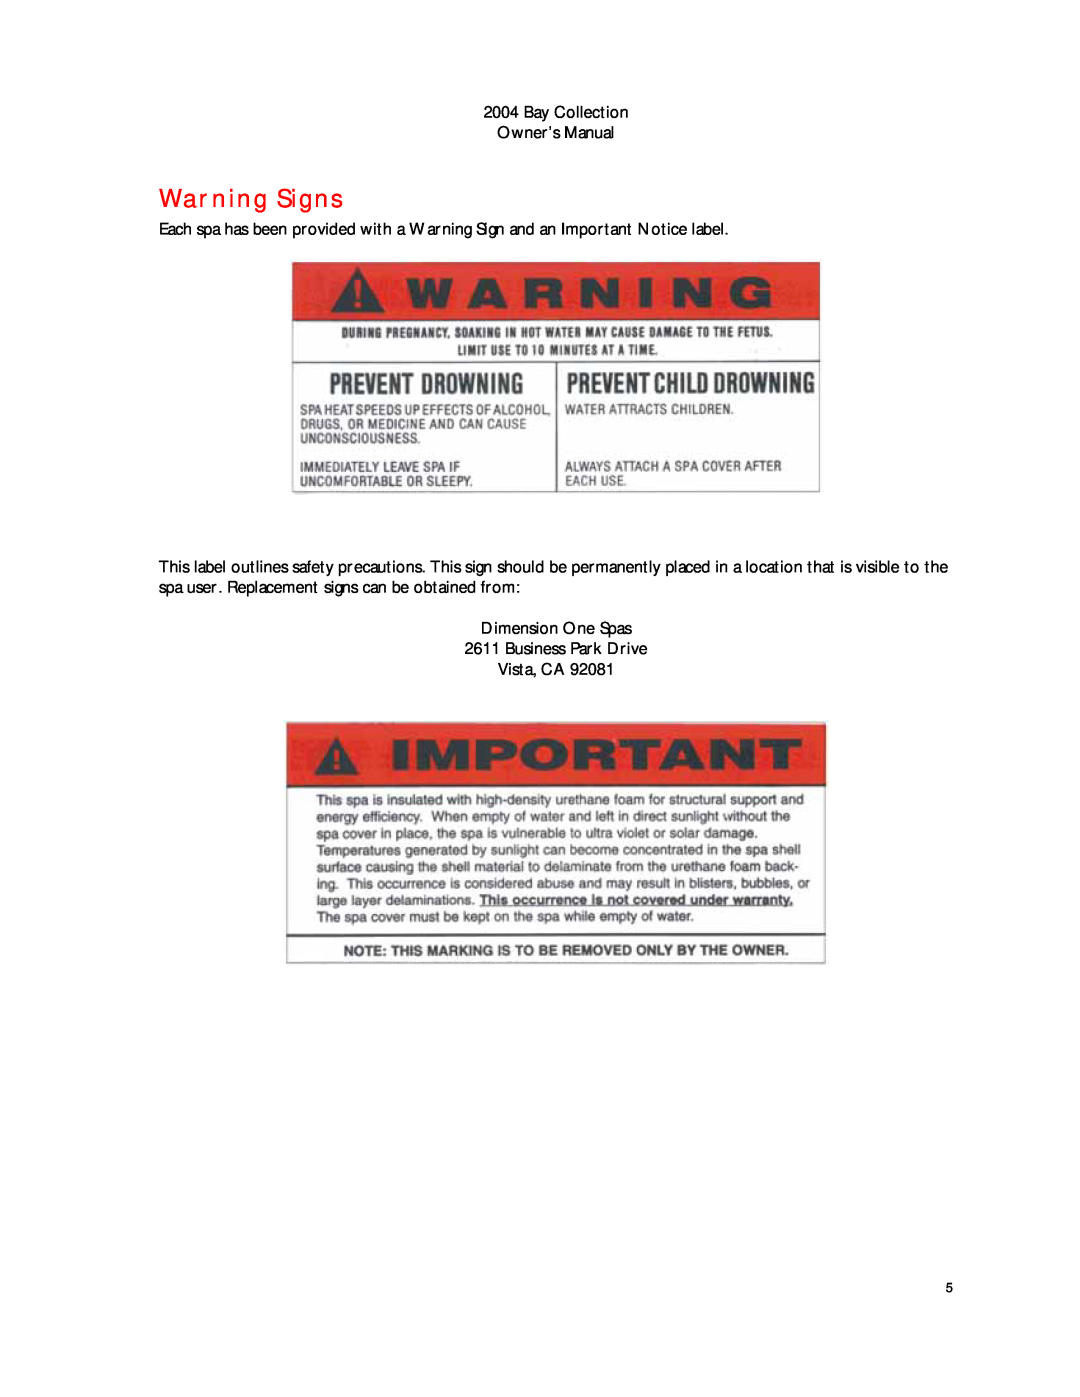 Dimension One Spas Bay Collection manual Warning Signs, Dimension One Spas 2611 Business Park Drive Vista, CA 